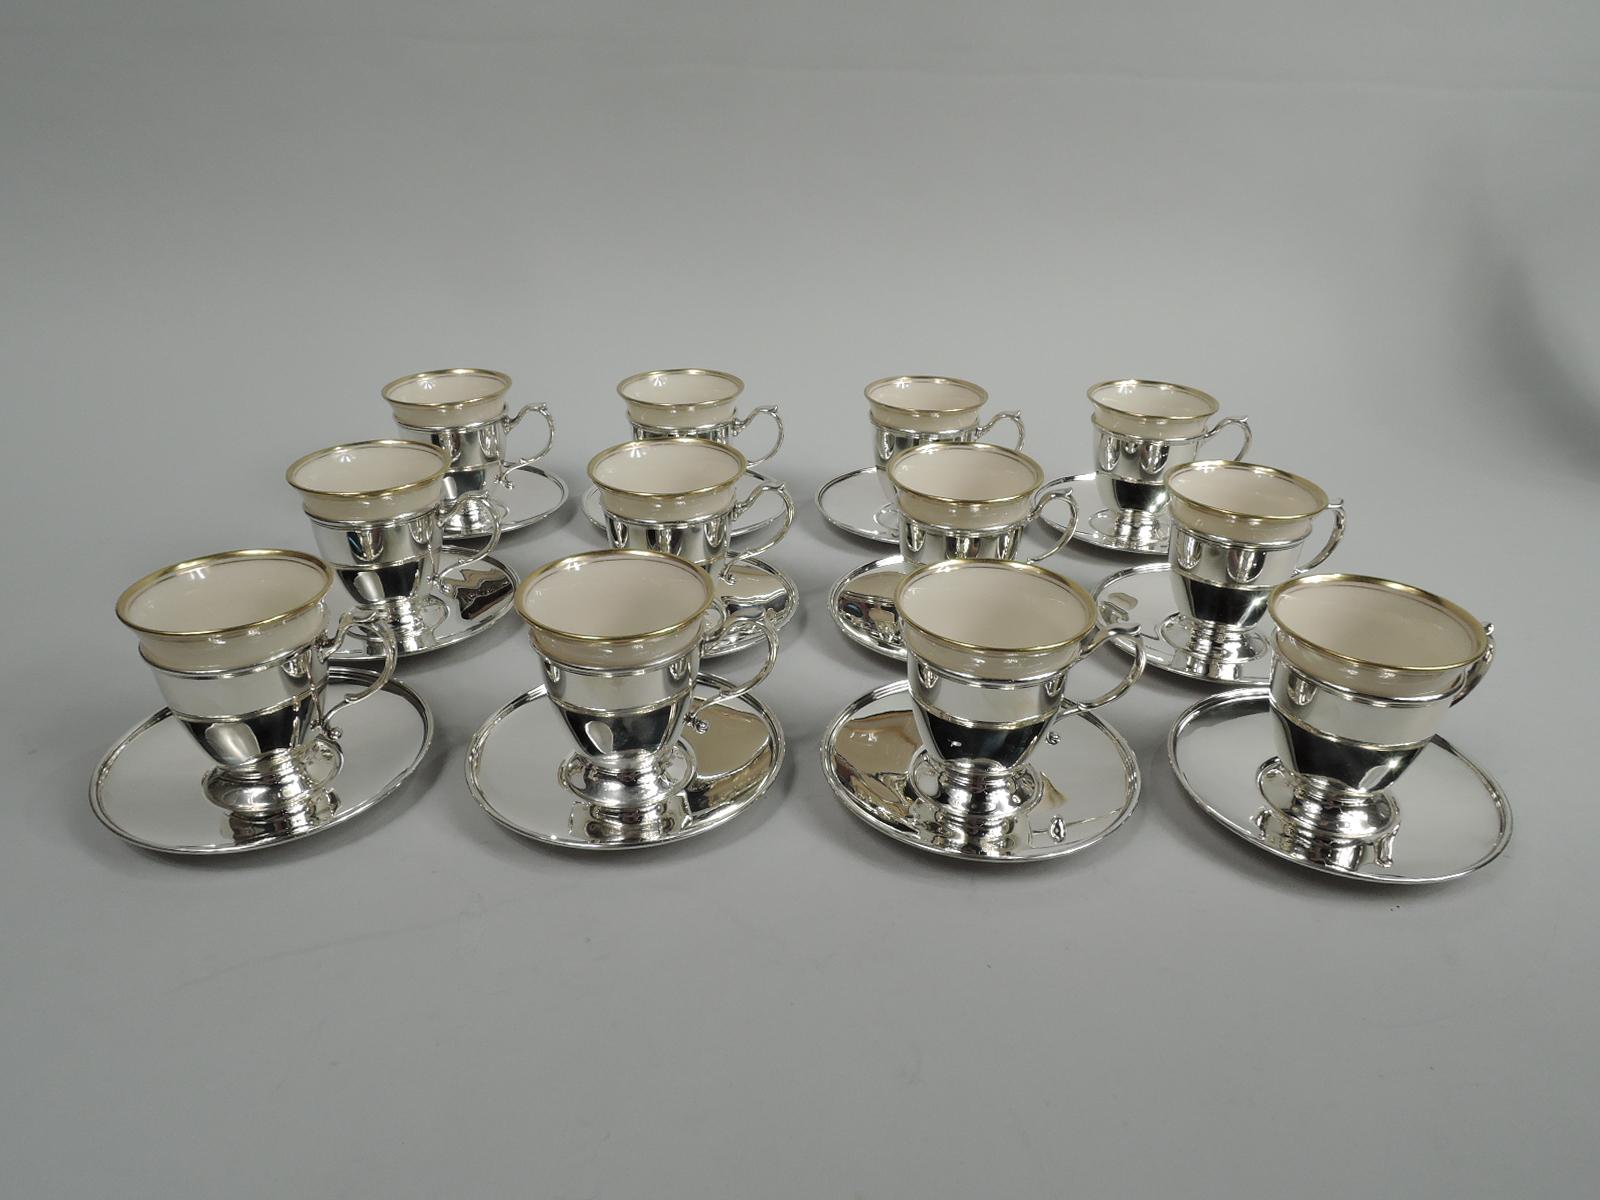 Set of 12 Edwardian sterling silver demi-tasse holders and saucers. Made by Tiffany & Co. in New York, ca 1914. This set comprises 12 holders and 12 saucers. Each holder: Conical with spread foot and capped s-scroll handle. Each saucer: Well with